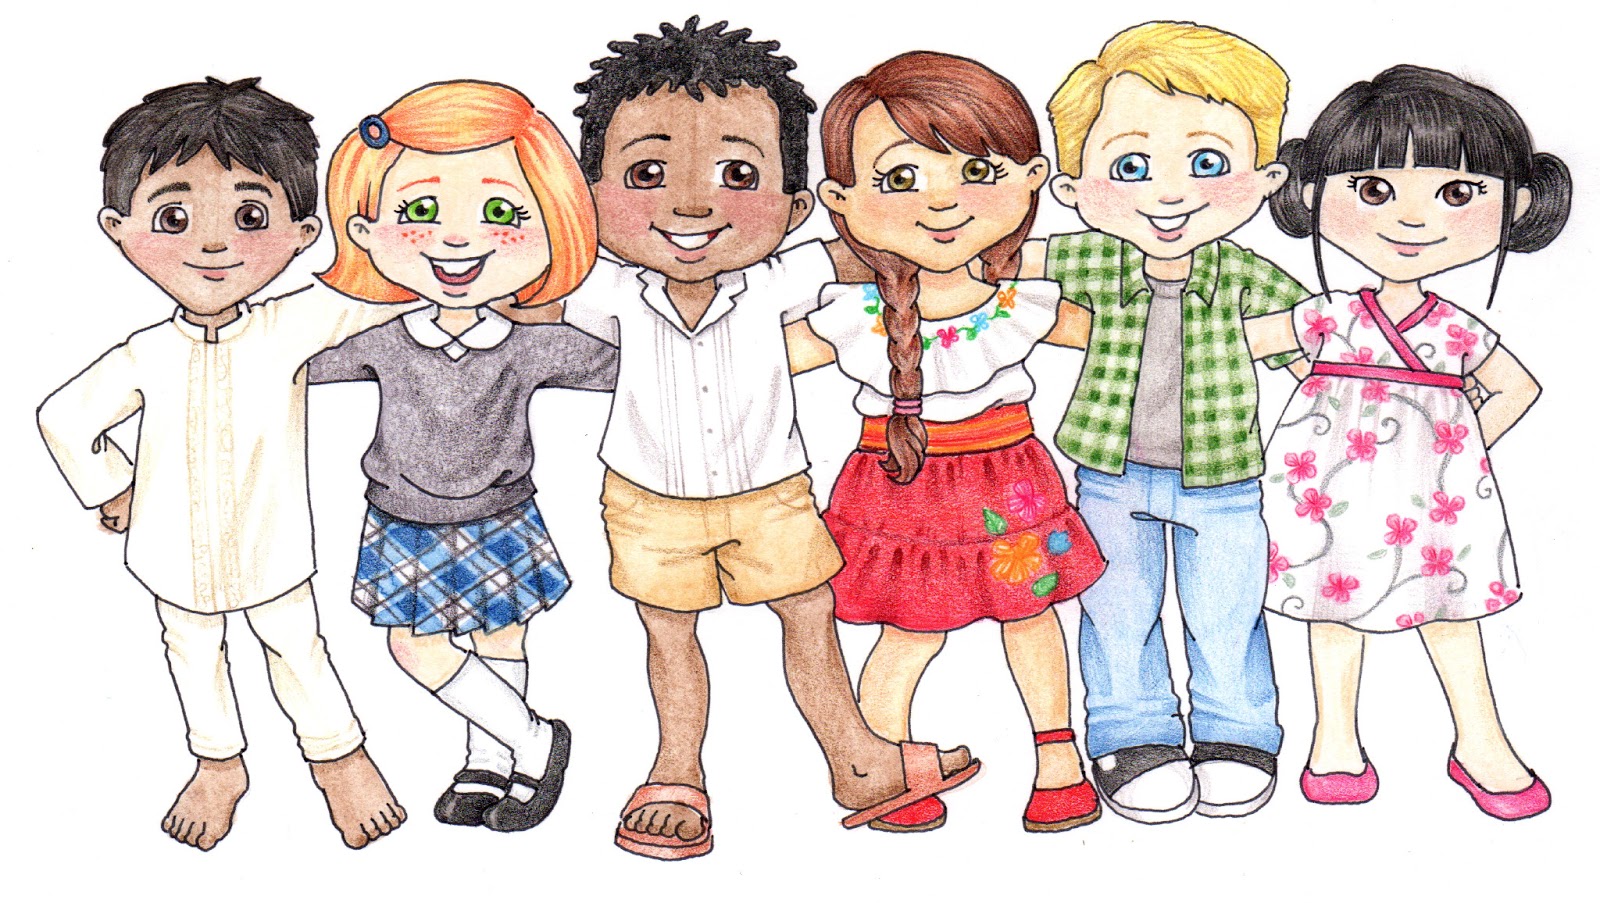 Free clip art pictures childr - Clip Art Of Kids